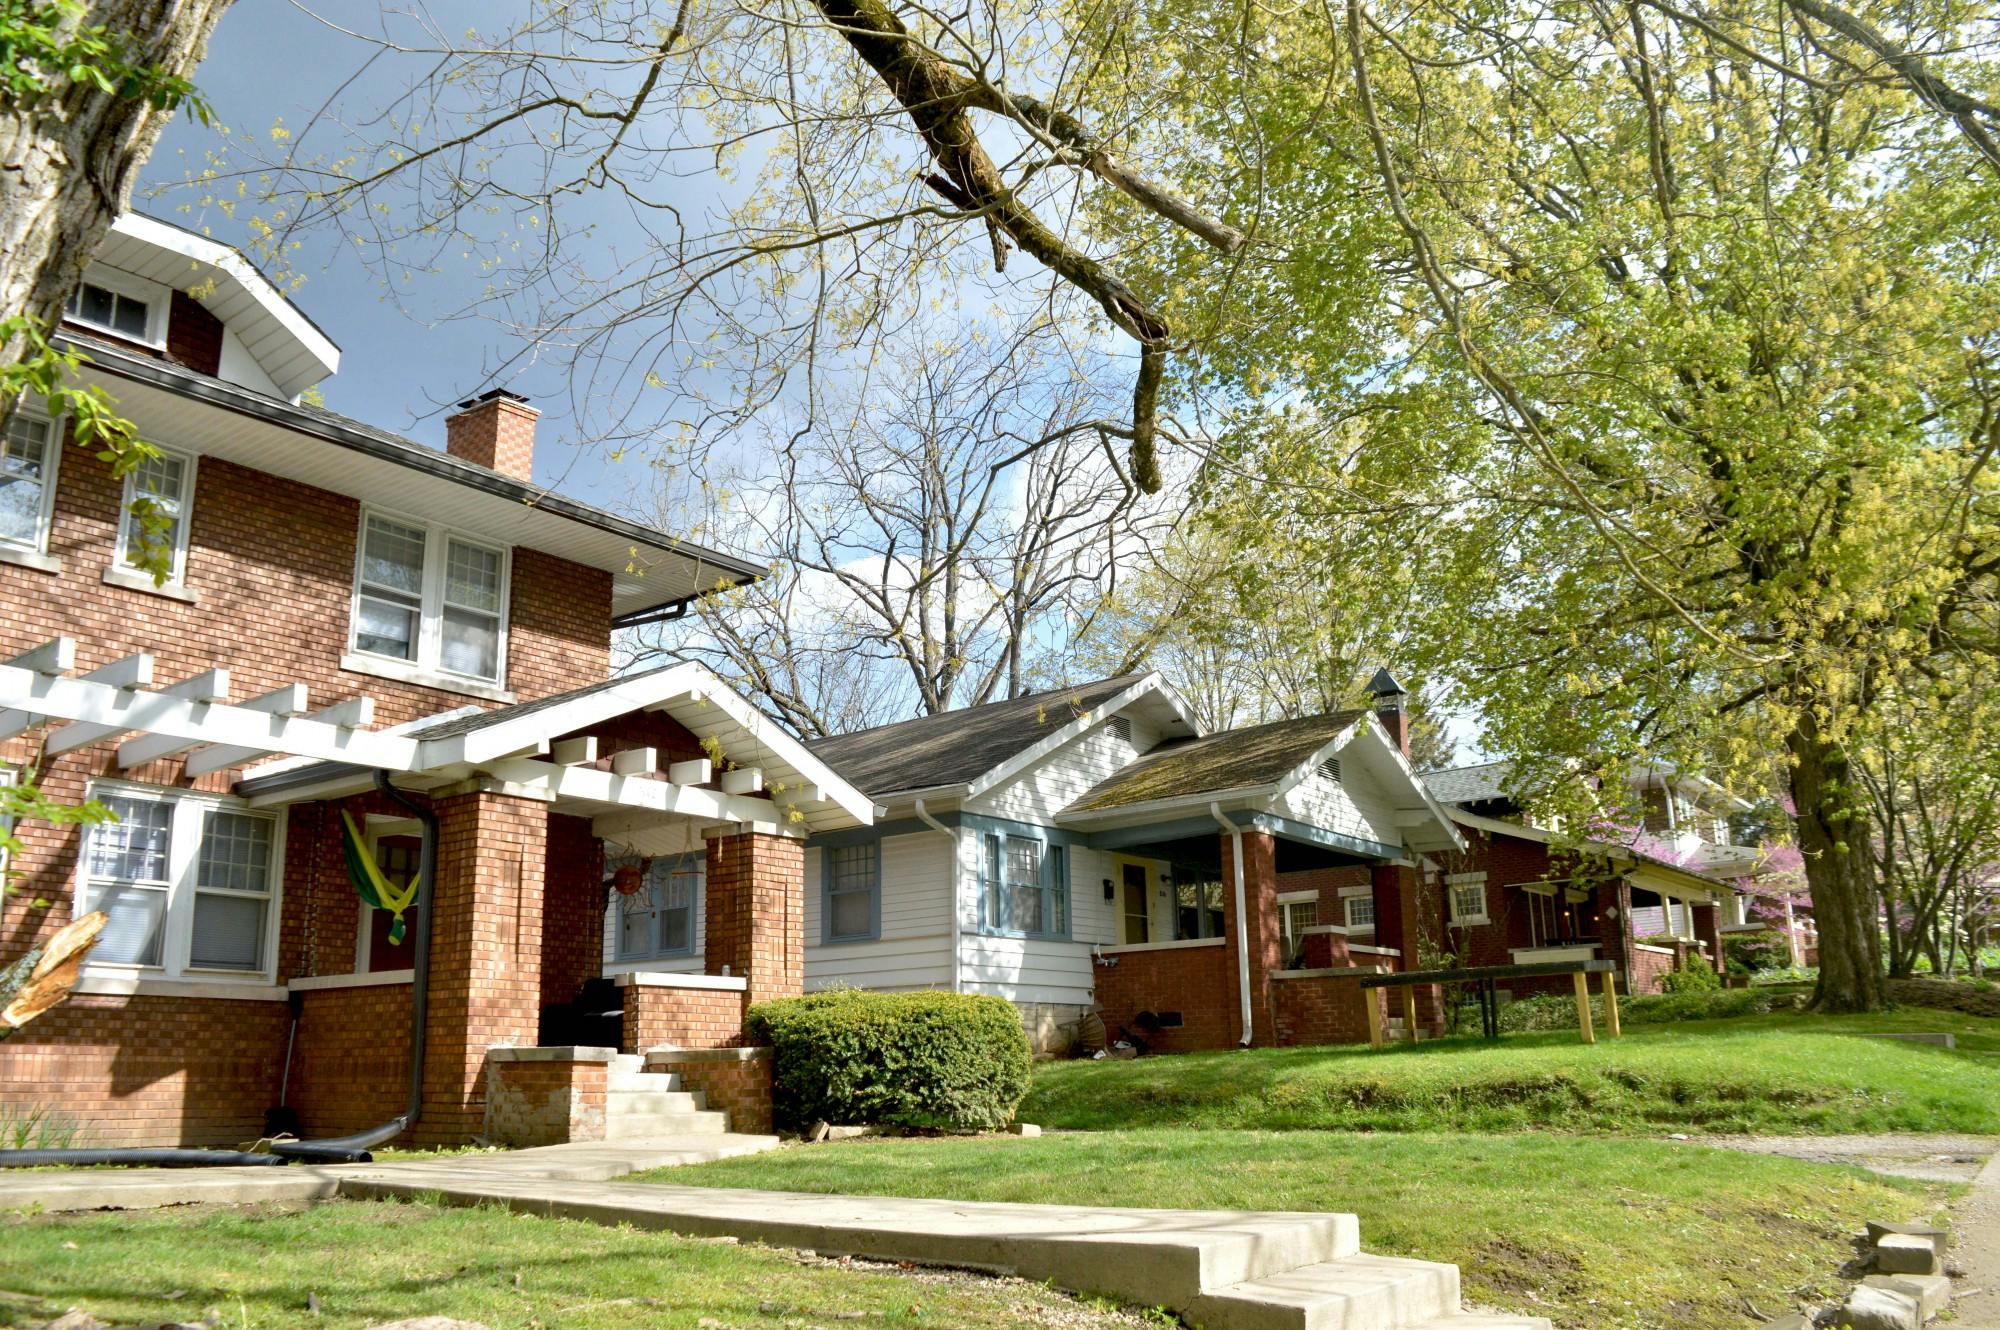 Houses in Maple Heights neighborhood appear April 21 in Bloomington. Maple Heights is one of the multiple core neighborhoods in Bloomington. Residents have raised concerns about increased density, students and quality of life, if the UDO amendments are passed.